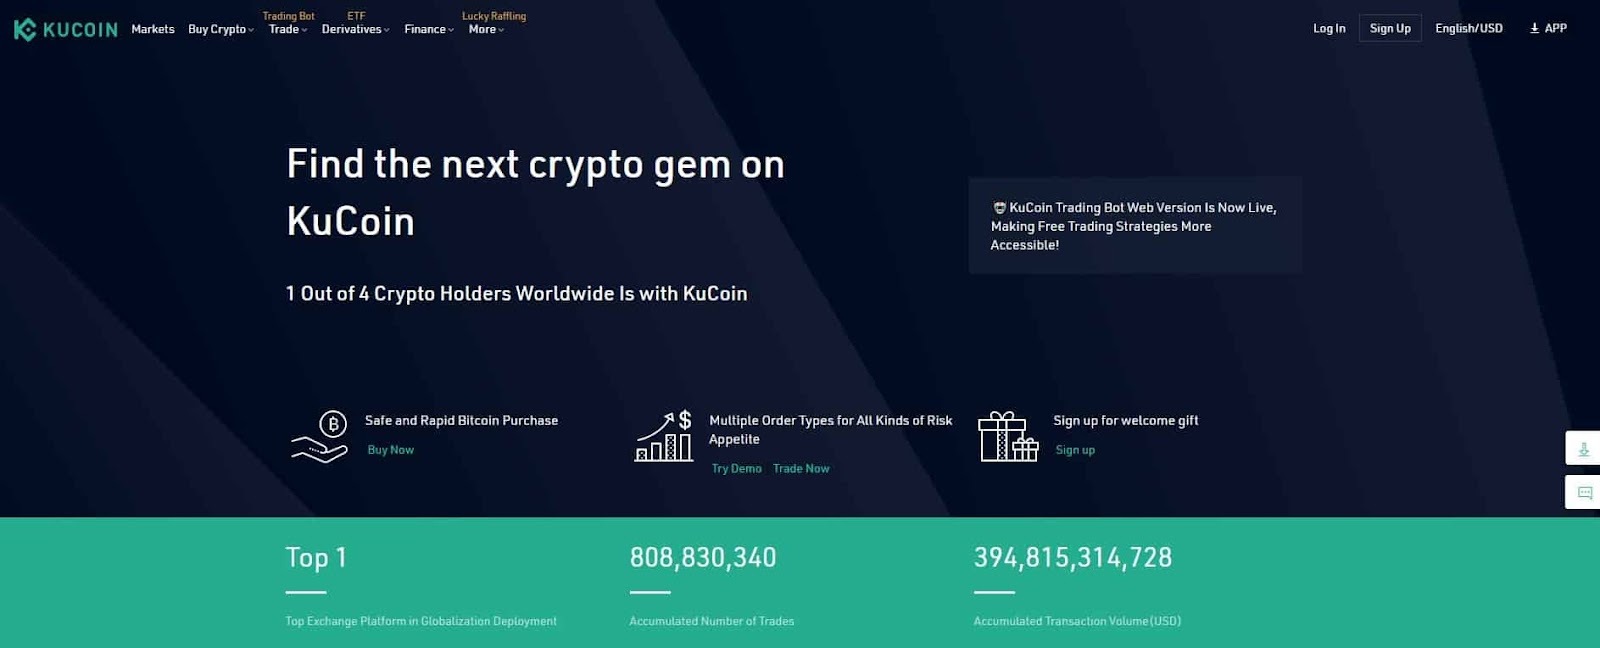 Get regular Cryptocurrency Price Updates On KuCoin Cryptocurrency